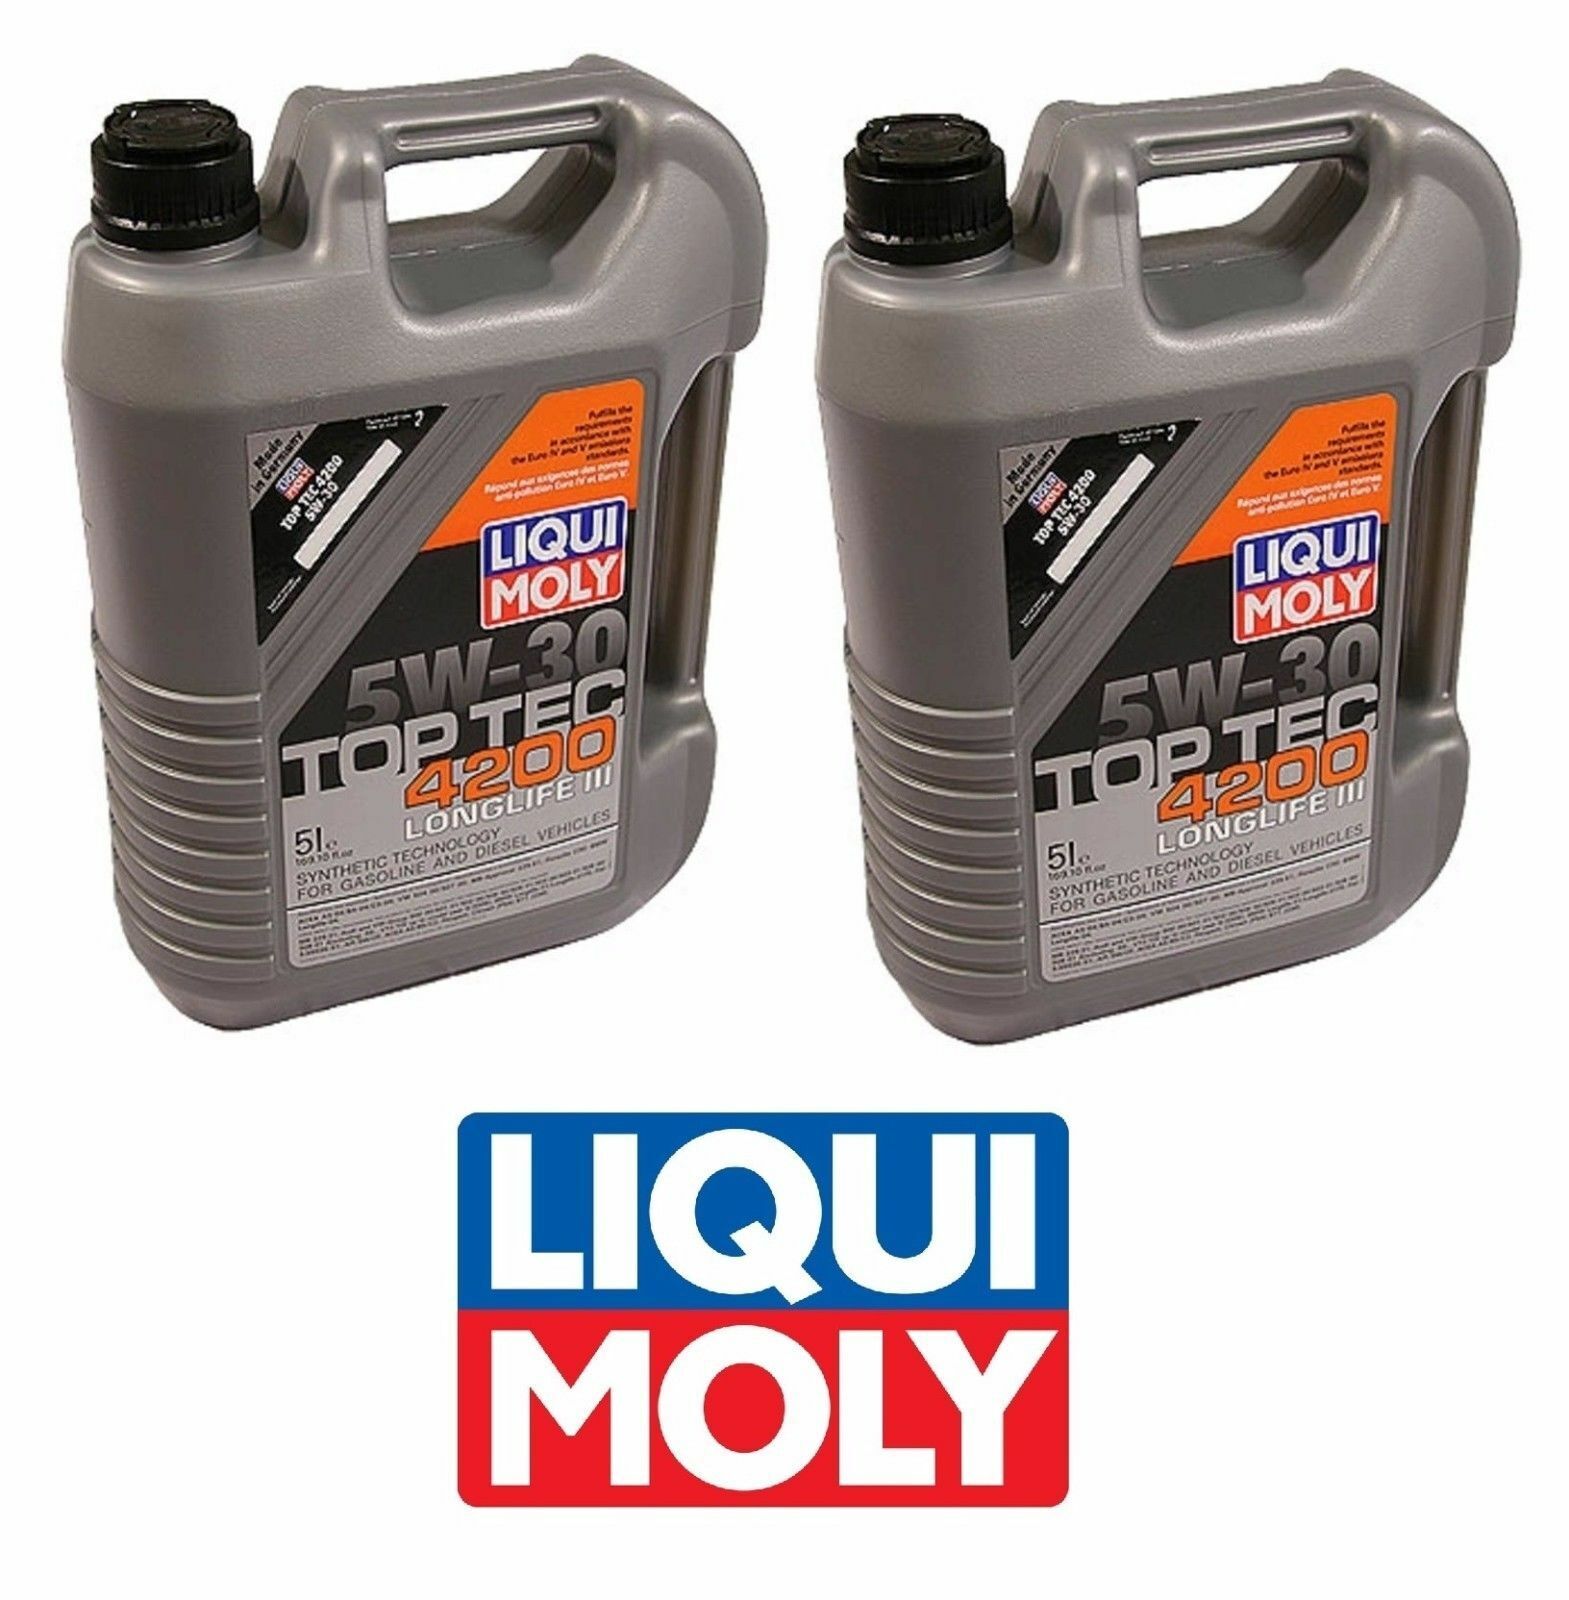 10 Liters Liqui Moly TOP TEC 4200 5w30 Synthetic Engine Oil for Acura Lexus VW